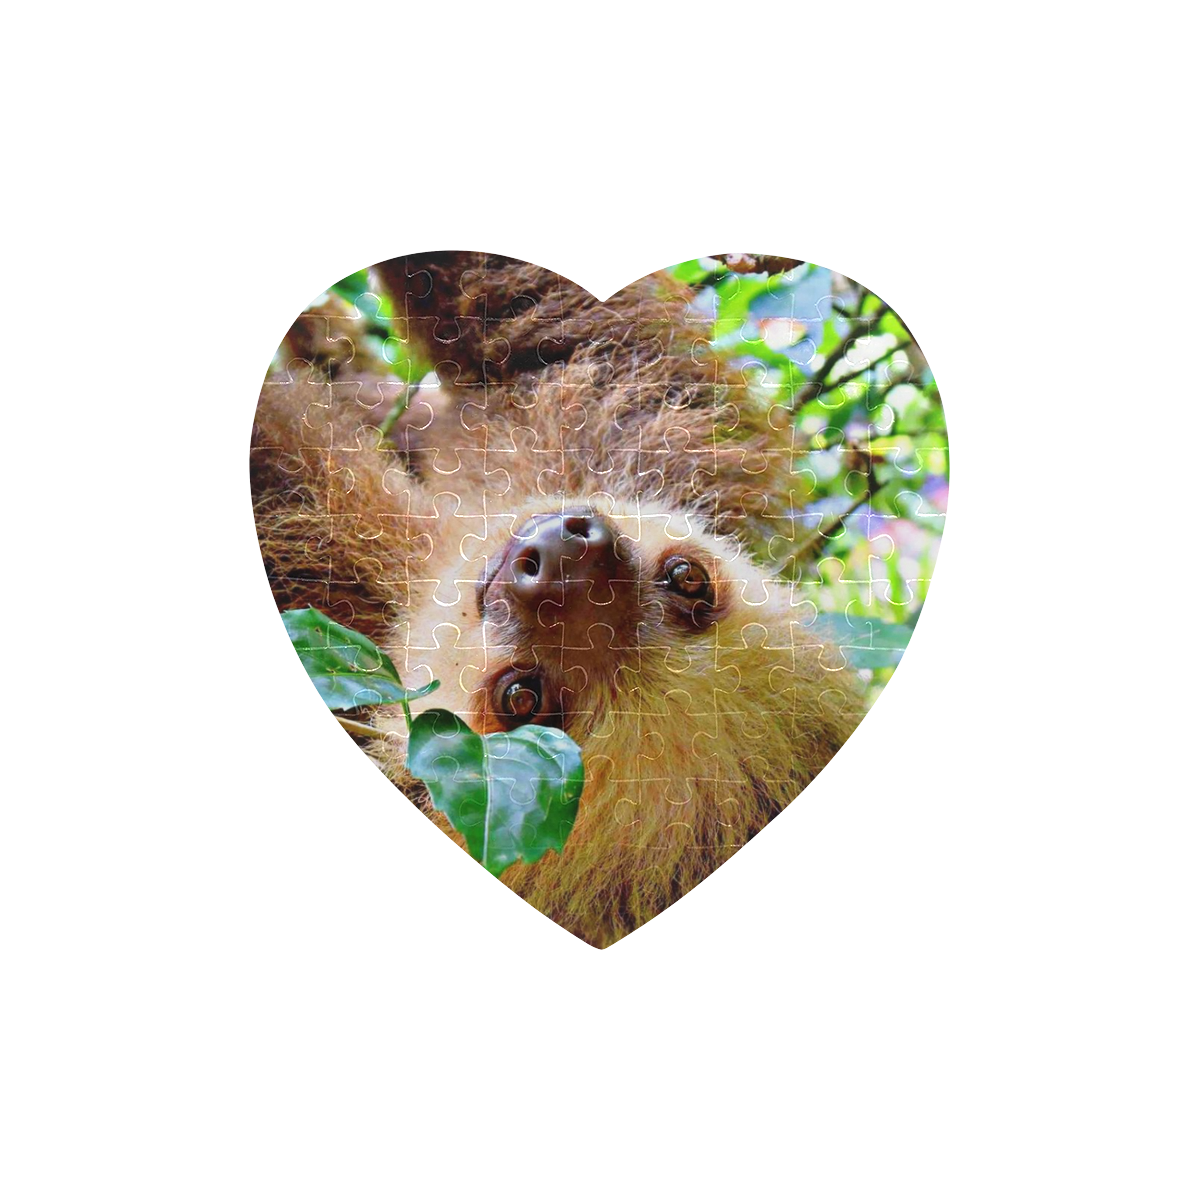 Awesome Sloth by JamColors Heart-Shaped Jigsaw Puzzle (Set of 75 Pieces)